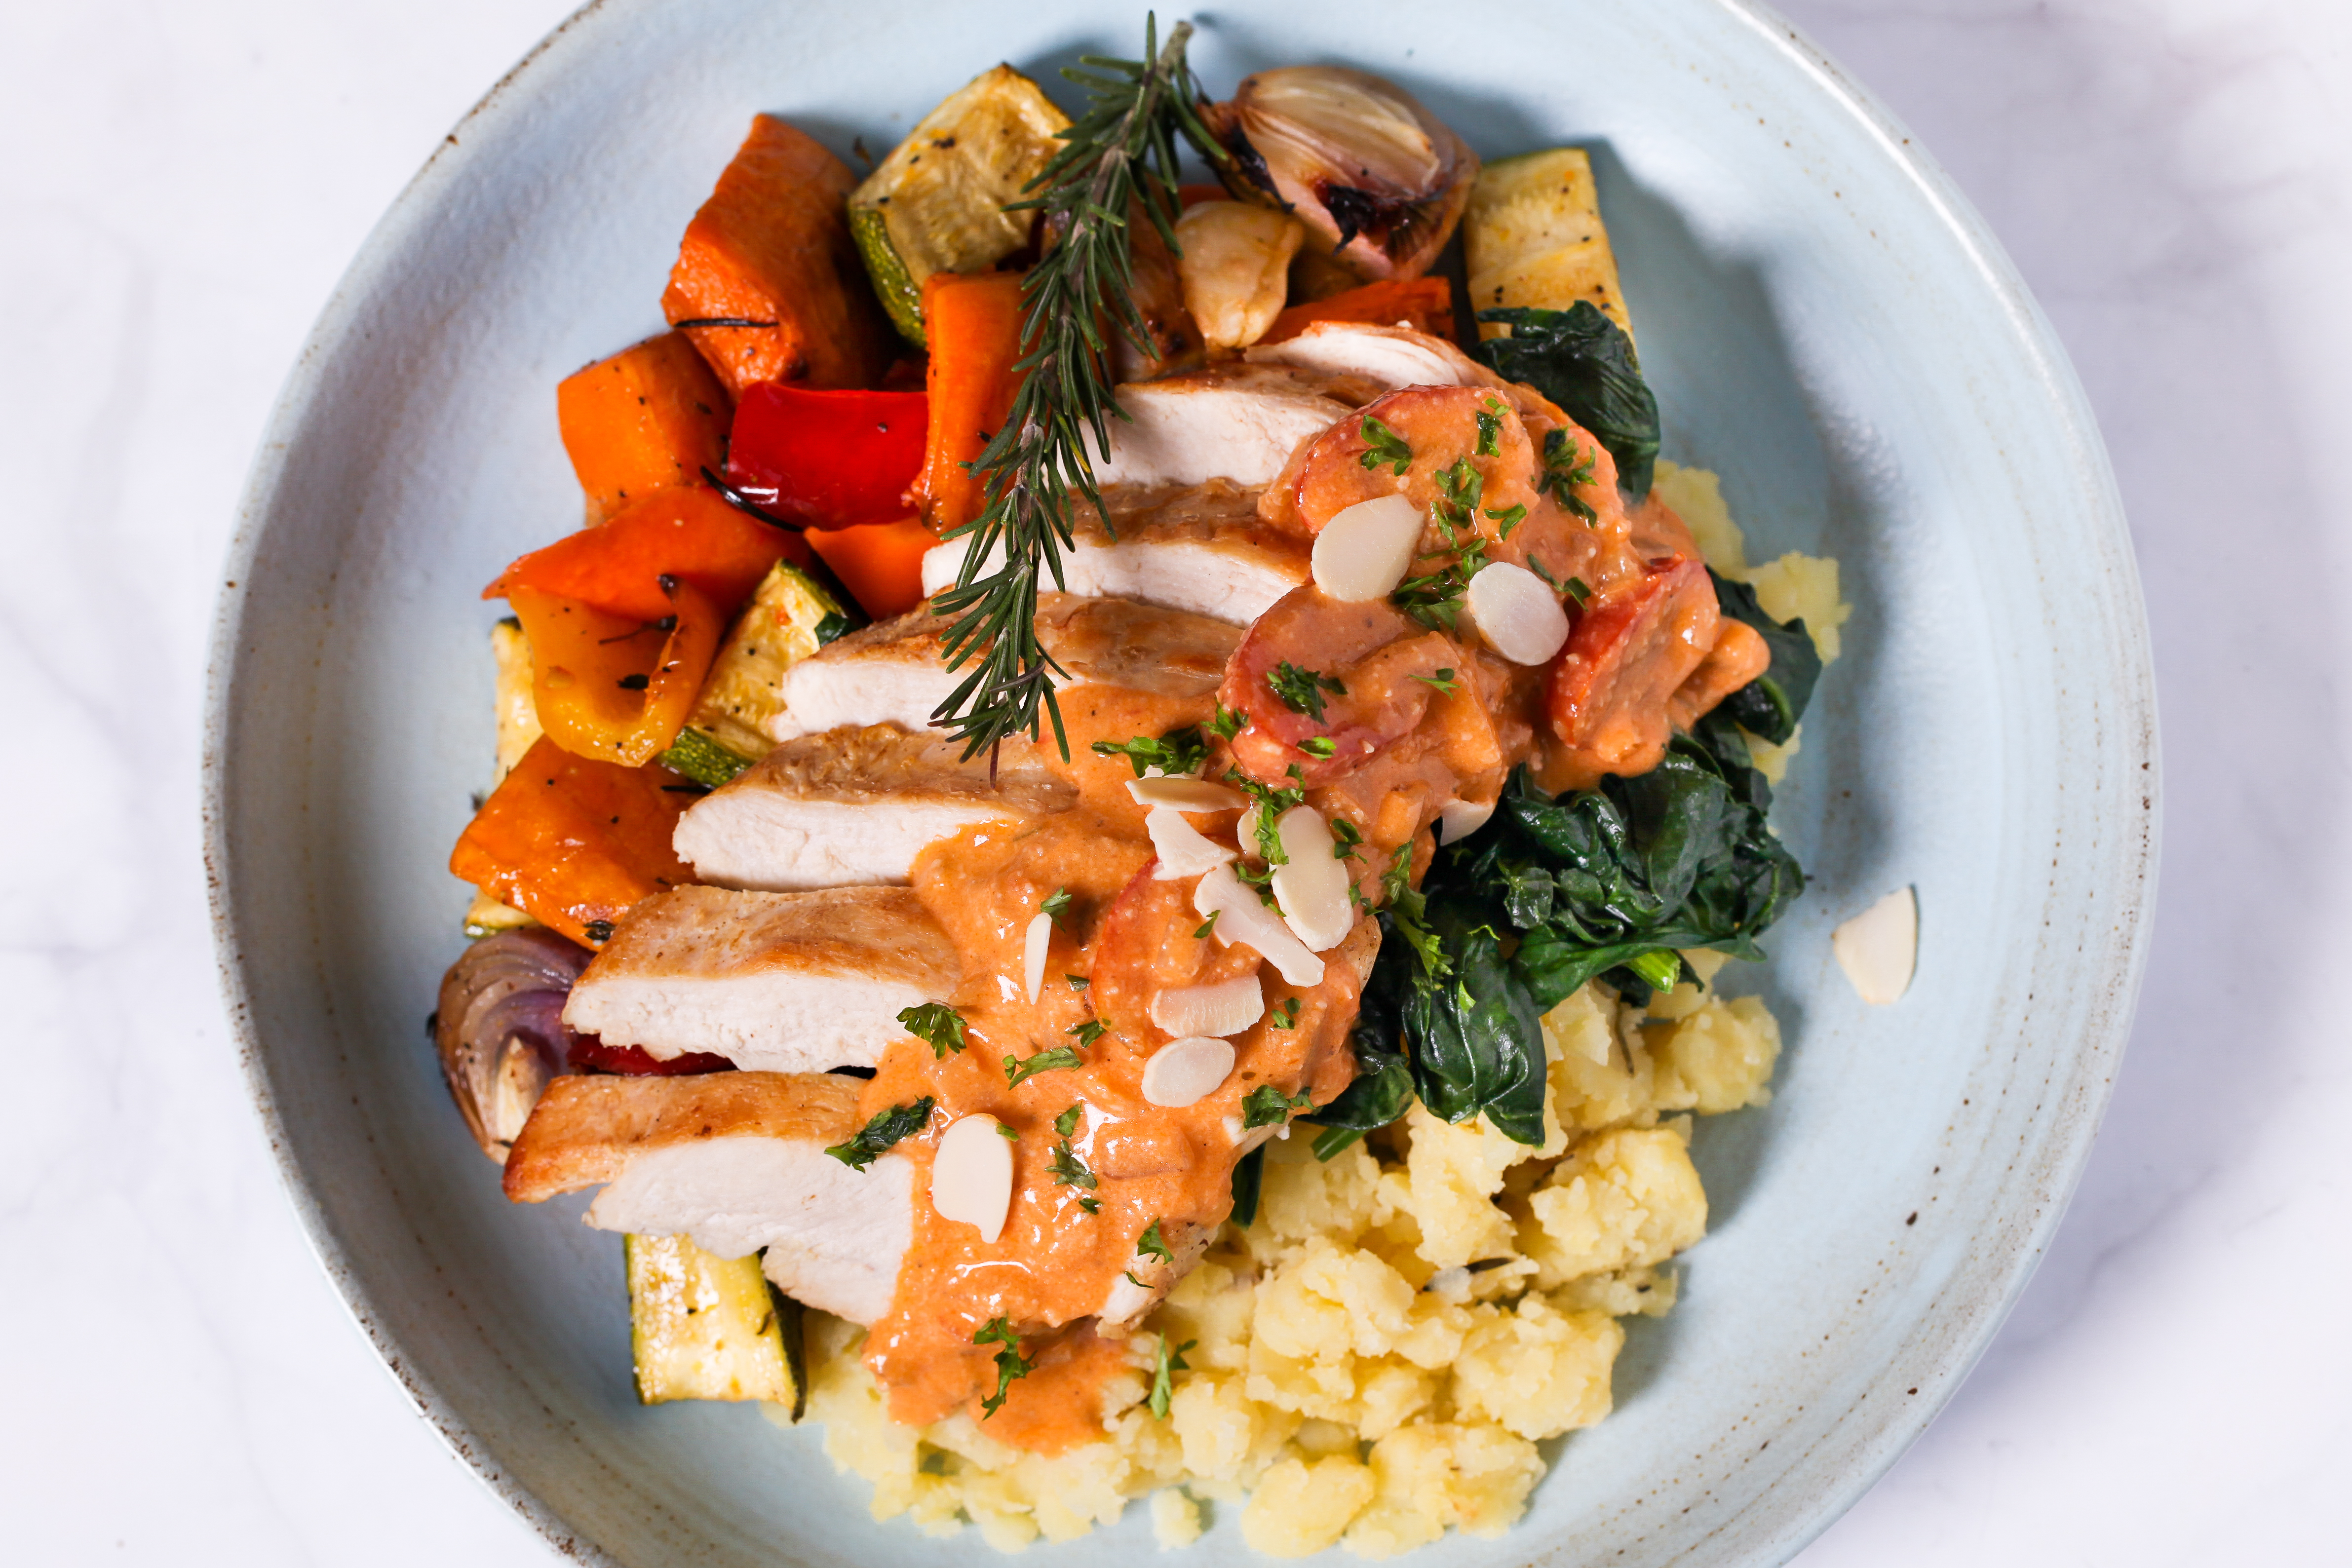 Creamy Tuscan Chicken with Spinach and Roasted Vegetables